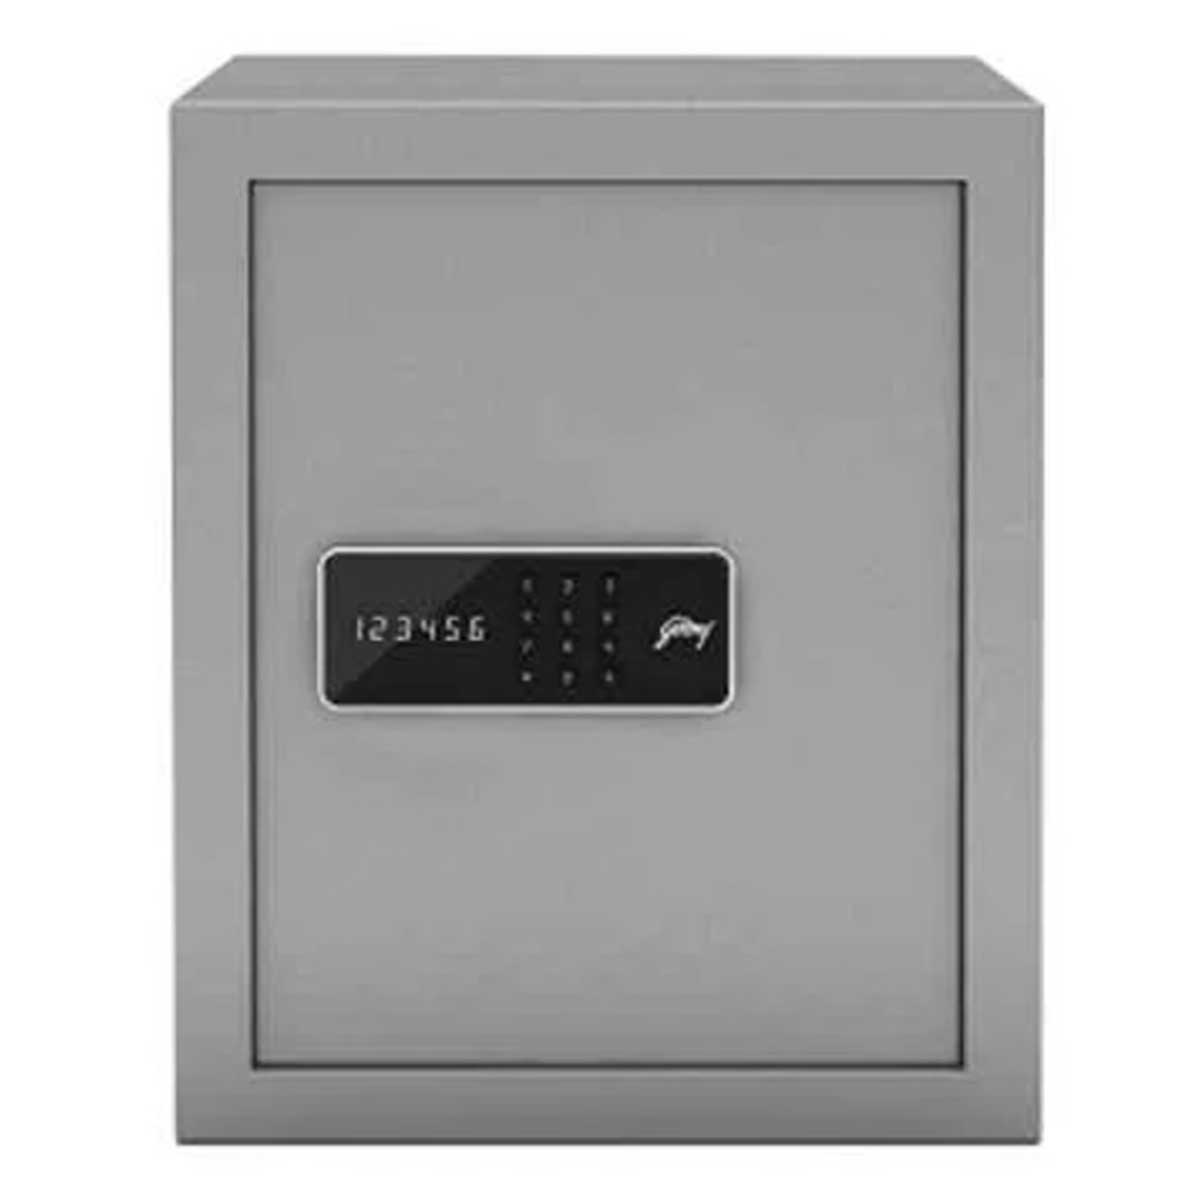 Steel security safe Manufacturers, Suppliers in Greater Kailash Iii